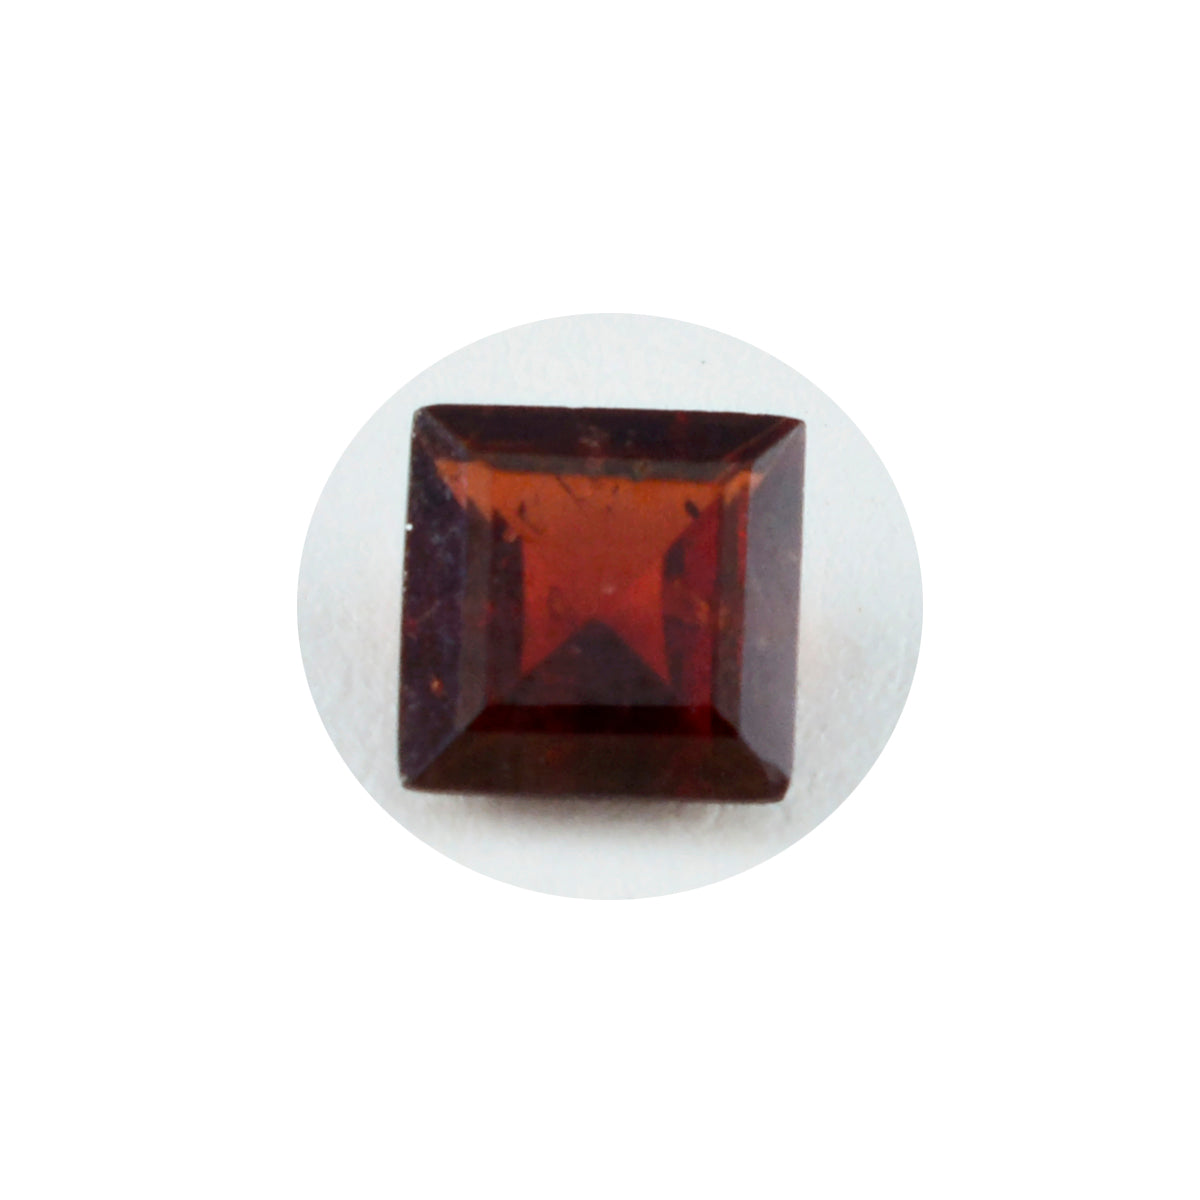 Riyogems 1PC Real Red Garnet Faceted 11x11 mm Square Shape nice-looking Quality Loose Stone